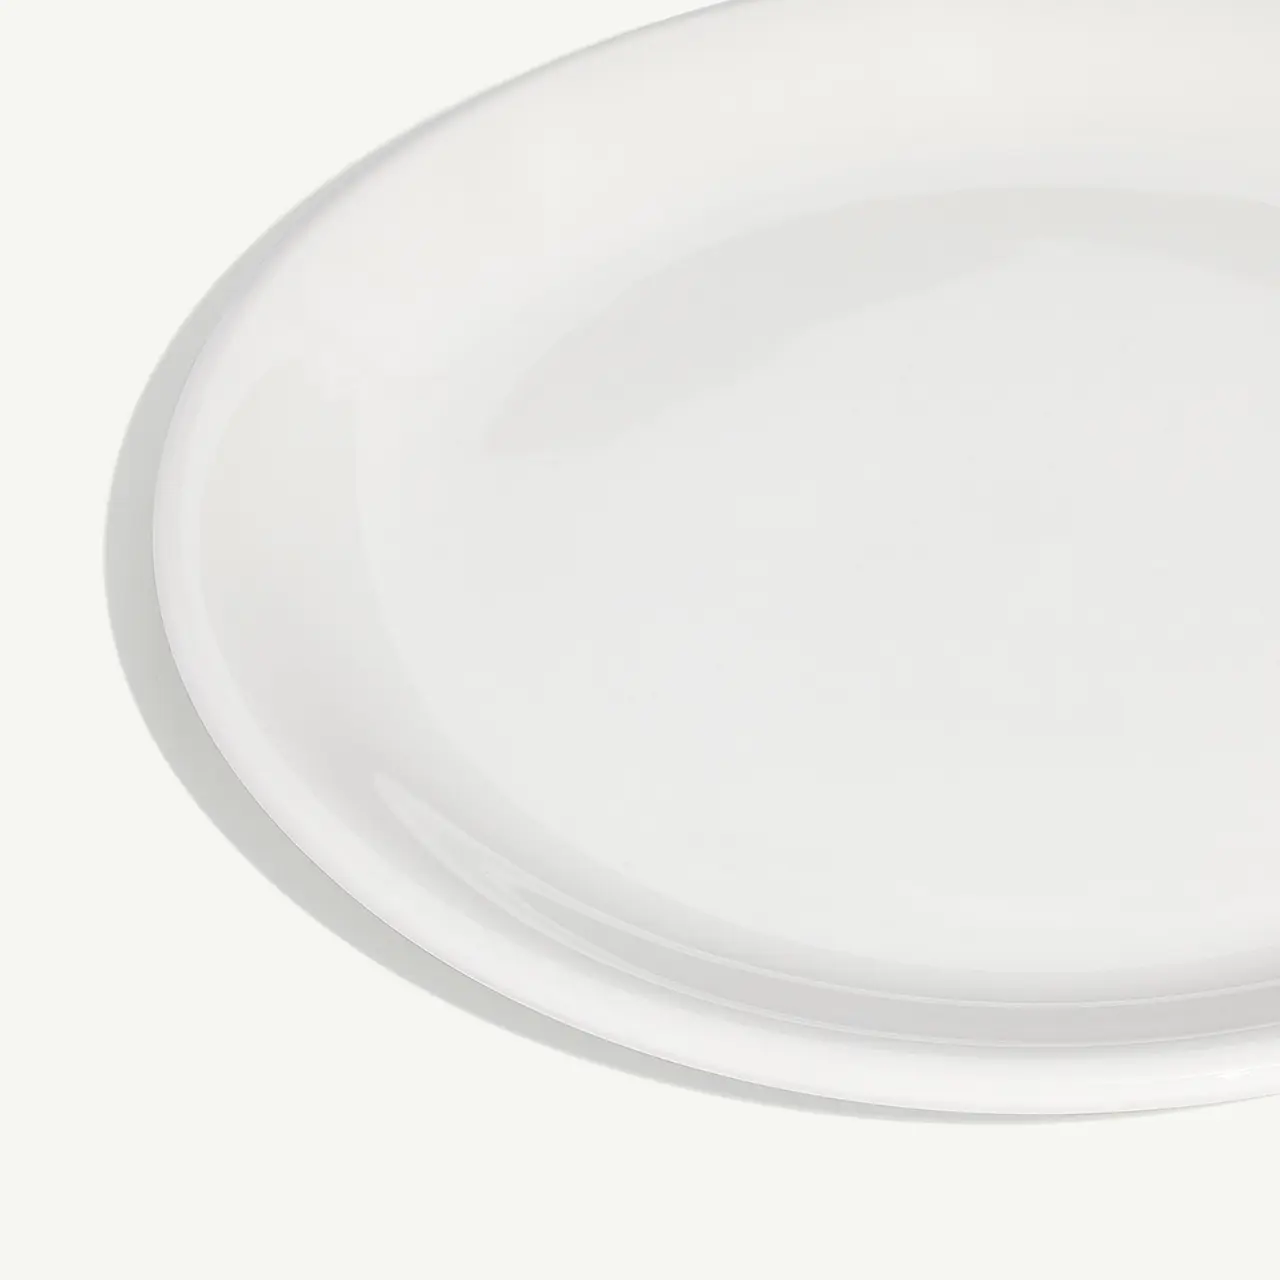 A plain white circular plate is displayed against a light background.